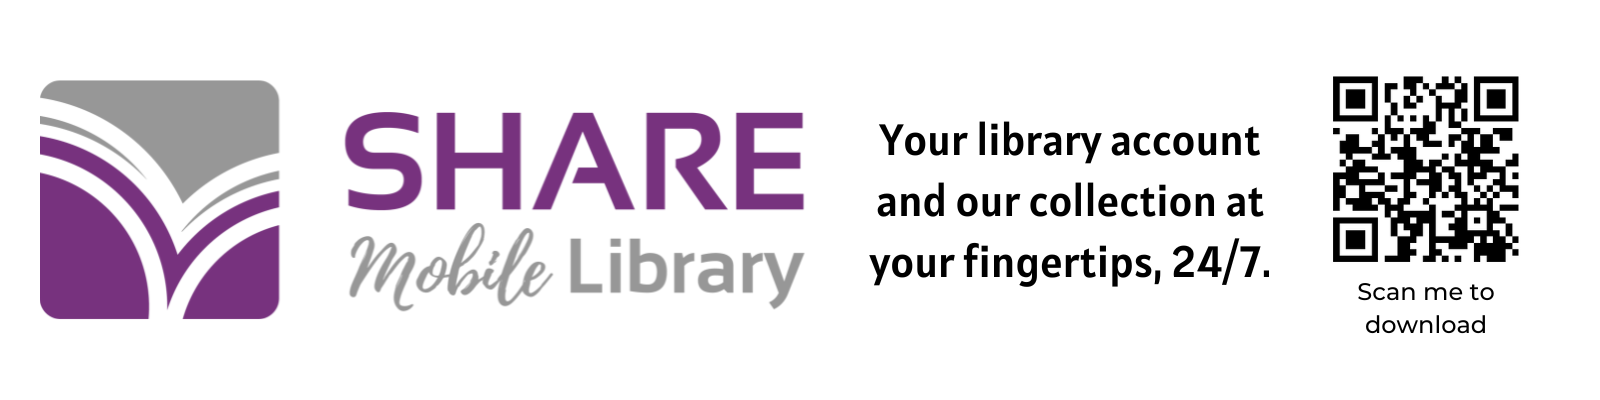 SHARE Mobile Library App Available for Download